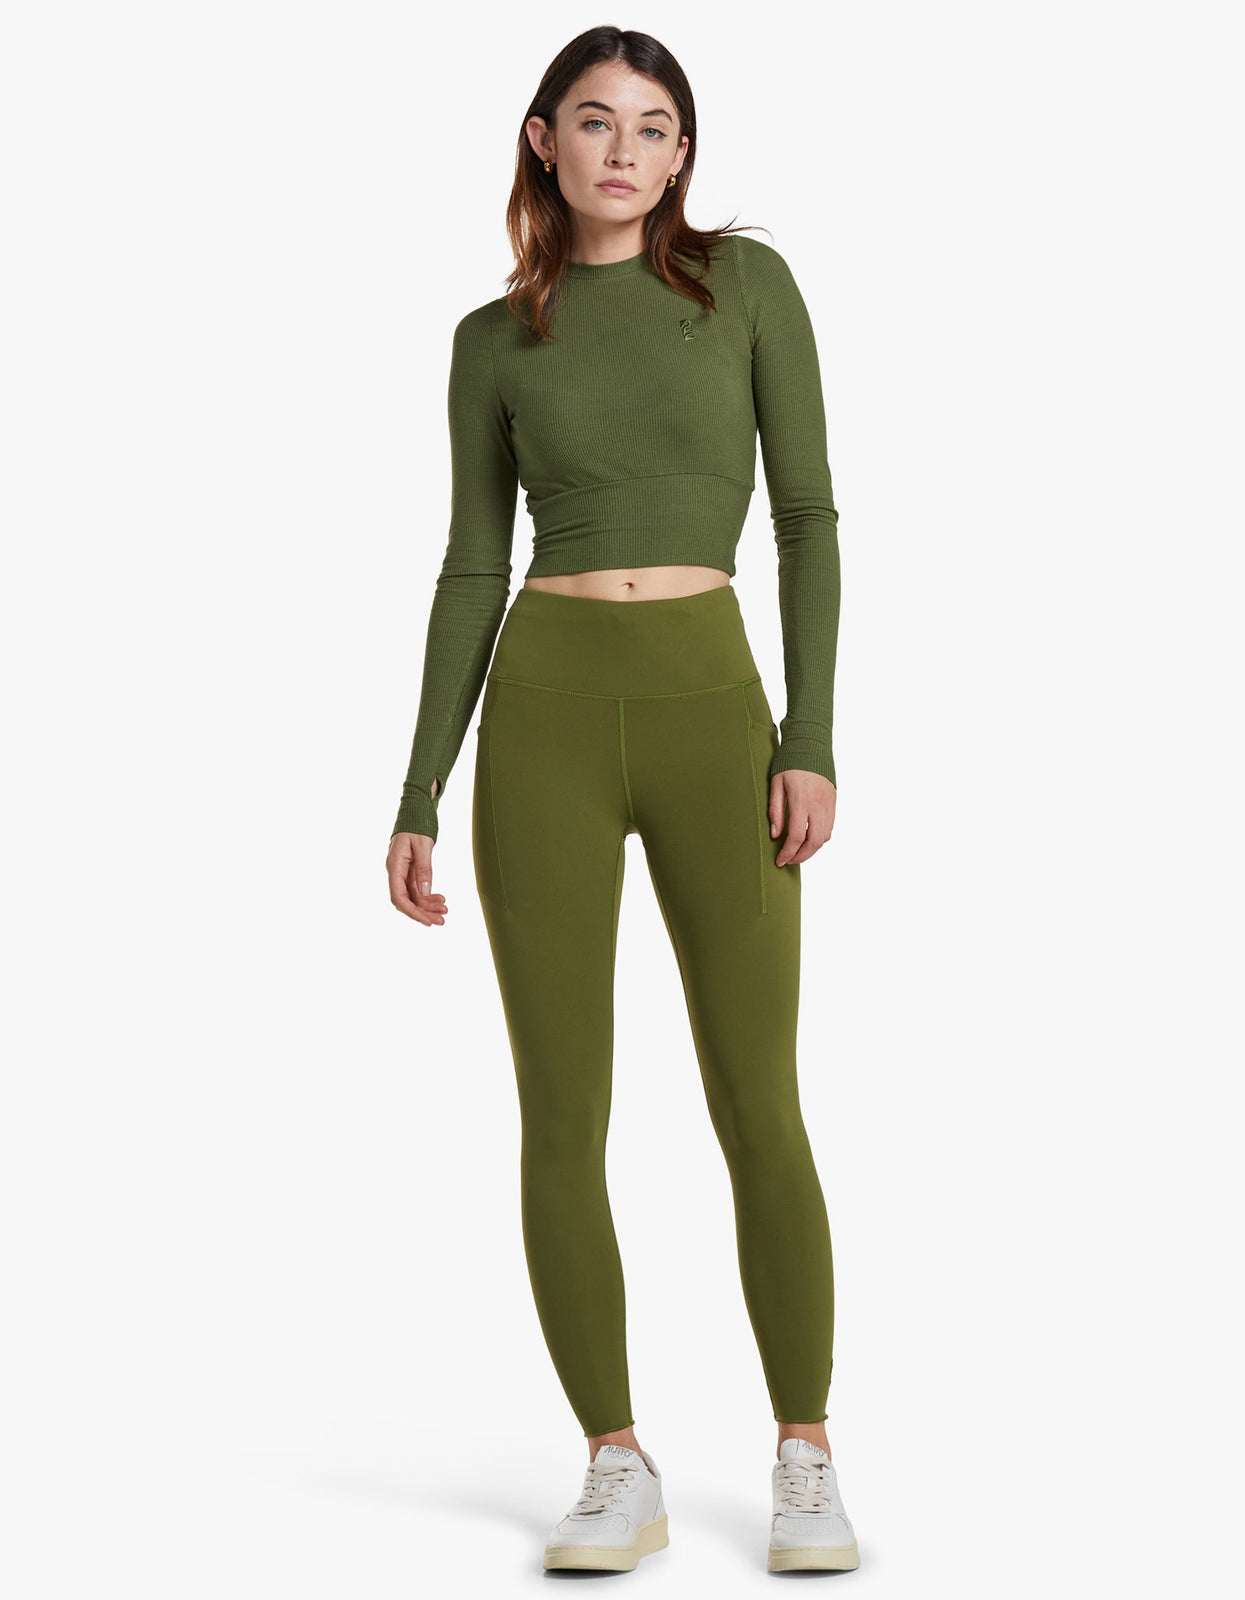 Leggings Outfit Insports  International Society of Precision Agriculture